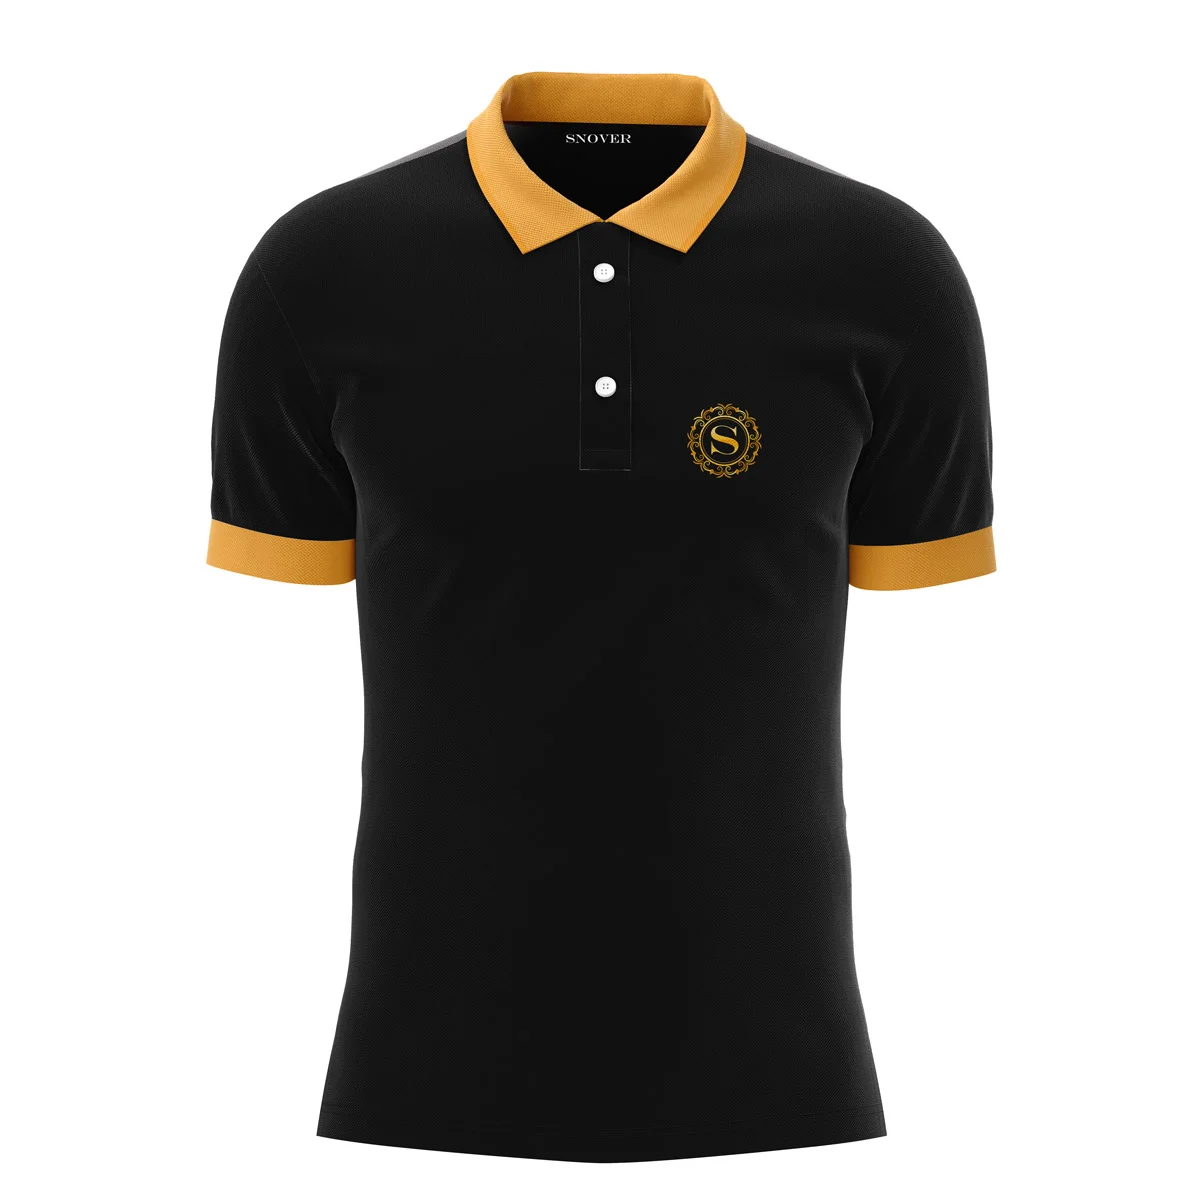 polo-shirt offers